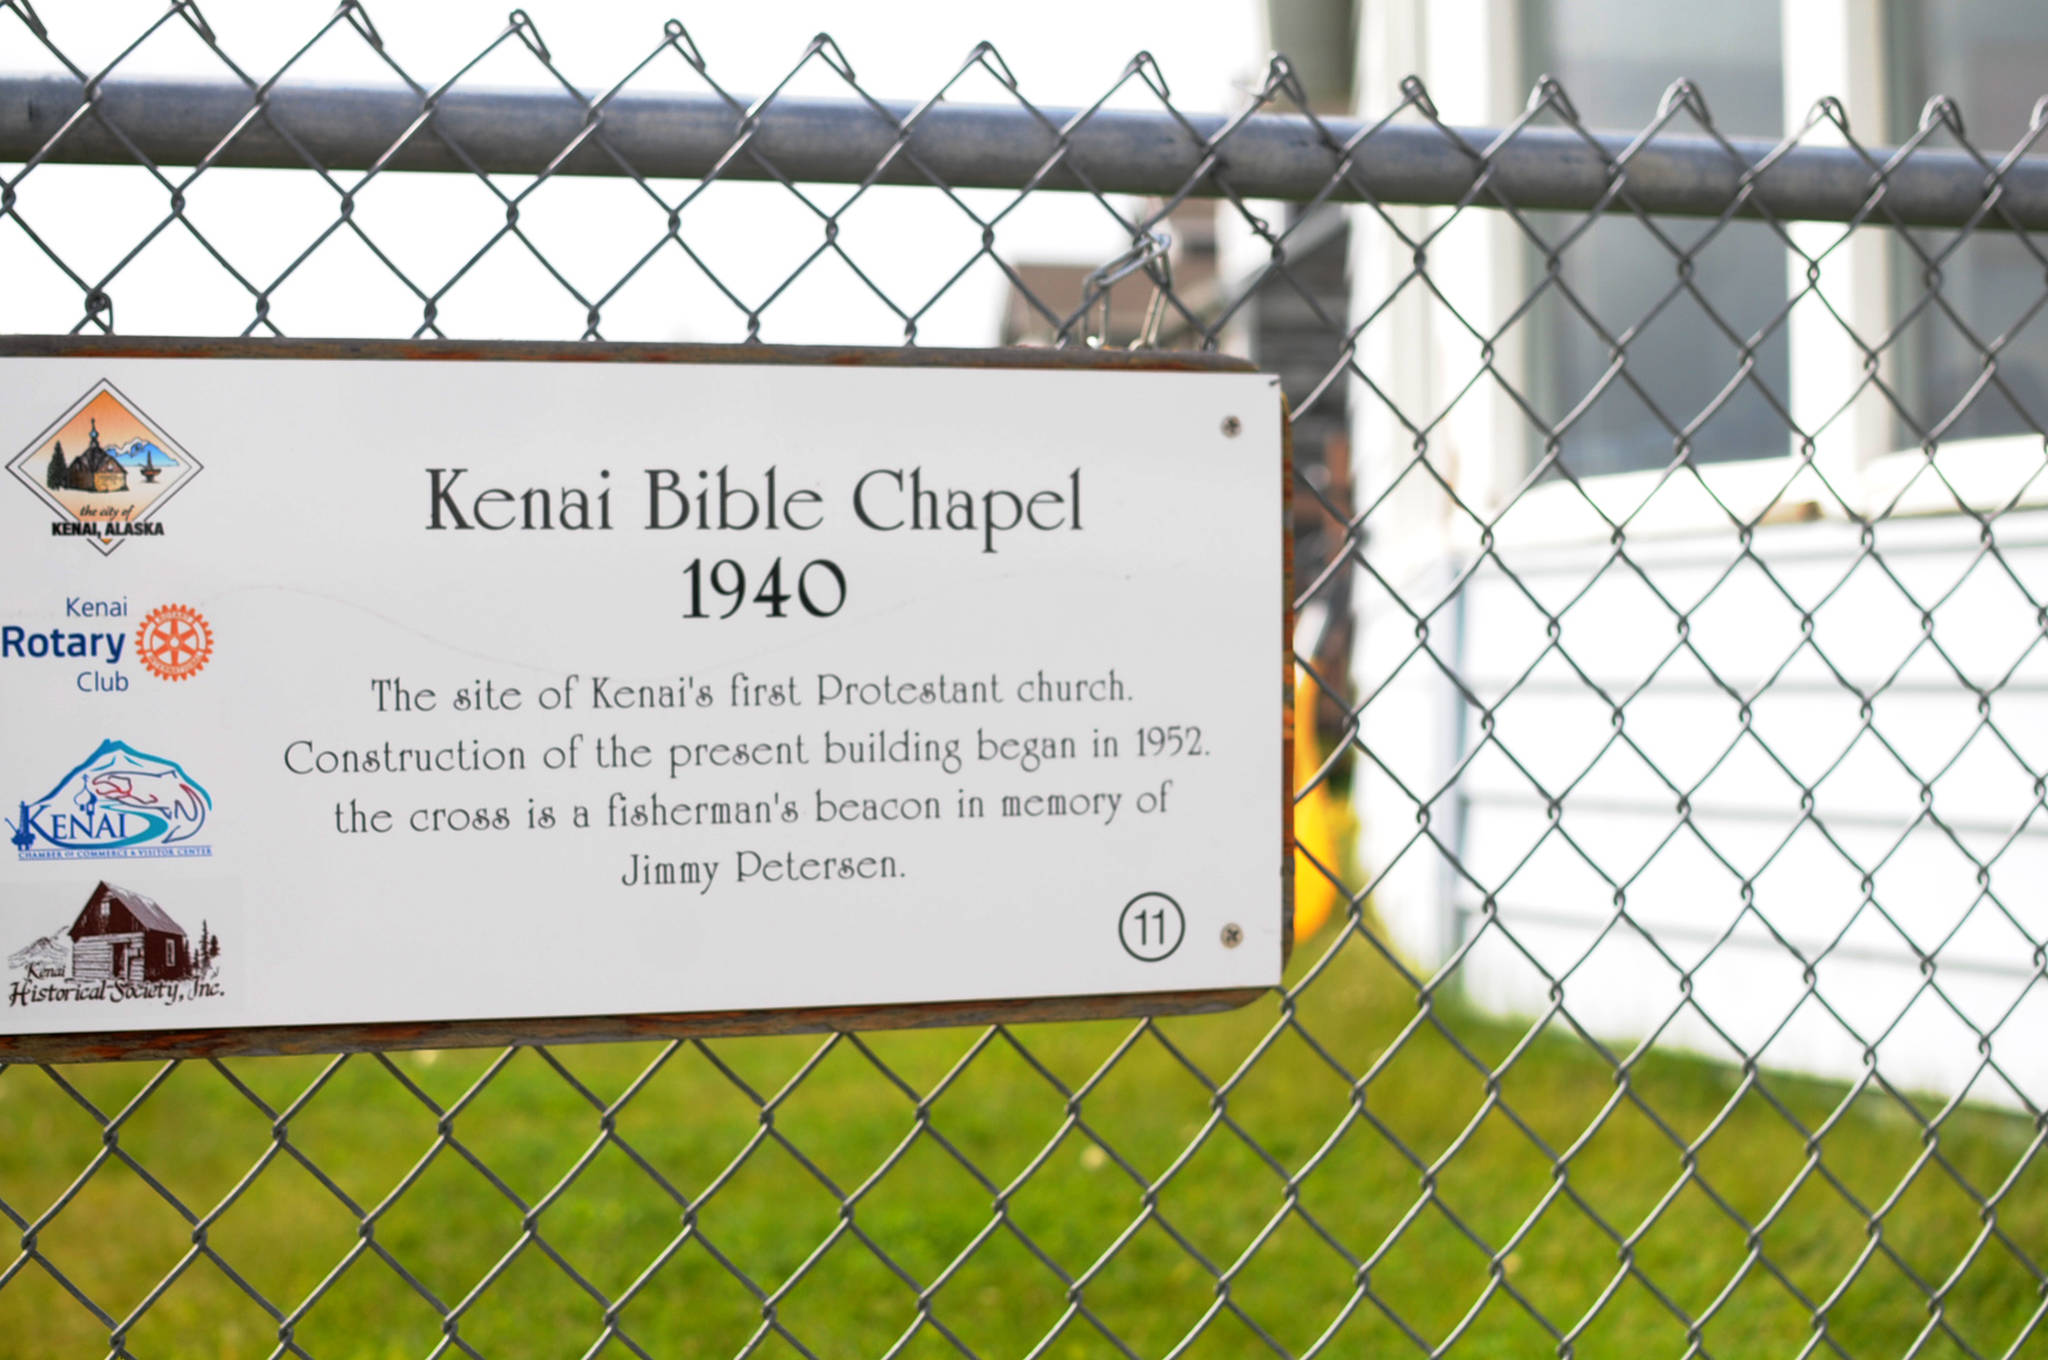 A historical marker hangs on the fence outside the Kenai Bible Church on Monday, June 12, 2017 in Kenai, Alaska. The chapel, which overlooks the Kenai River in Old Town Kenai, is the oldest Protestant church in town and will celebrate its 75th anniversary this year. (Photo by Elizabeth Earl/Peninsula Clarion)